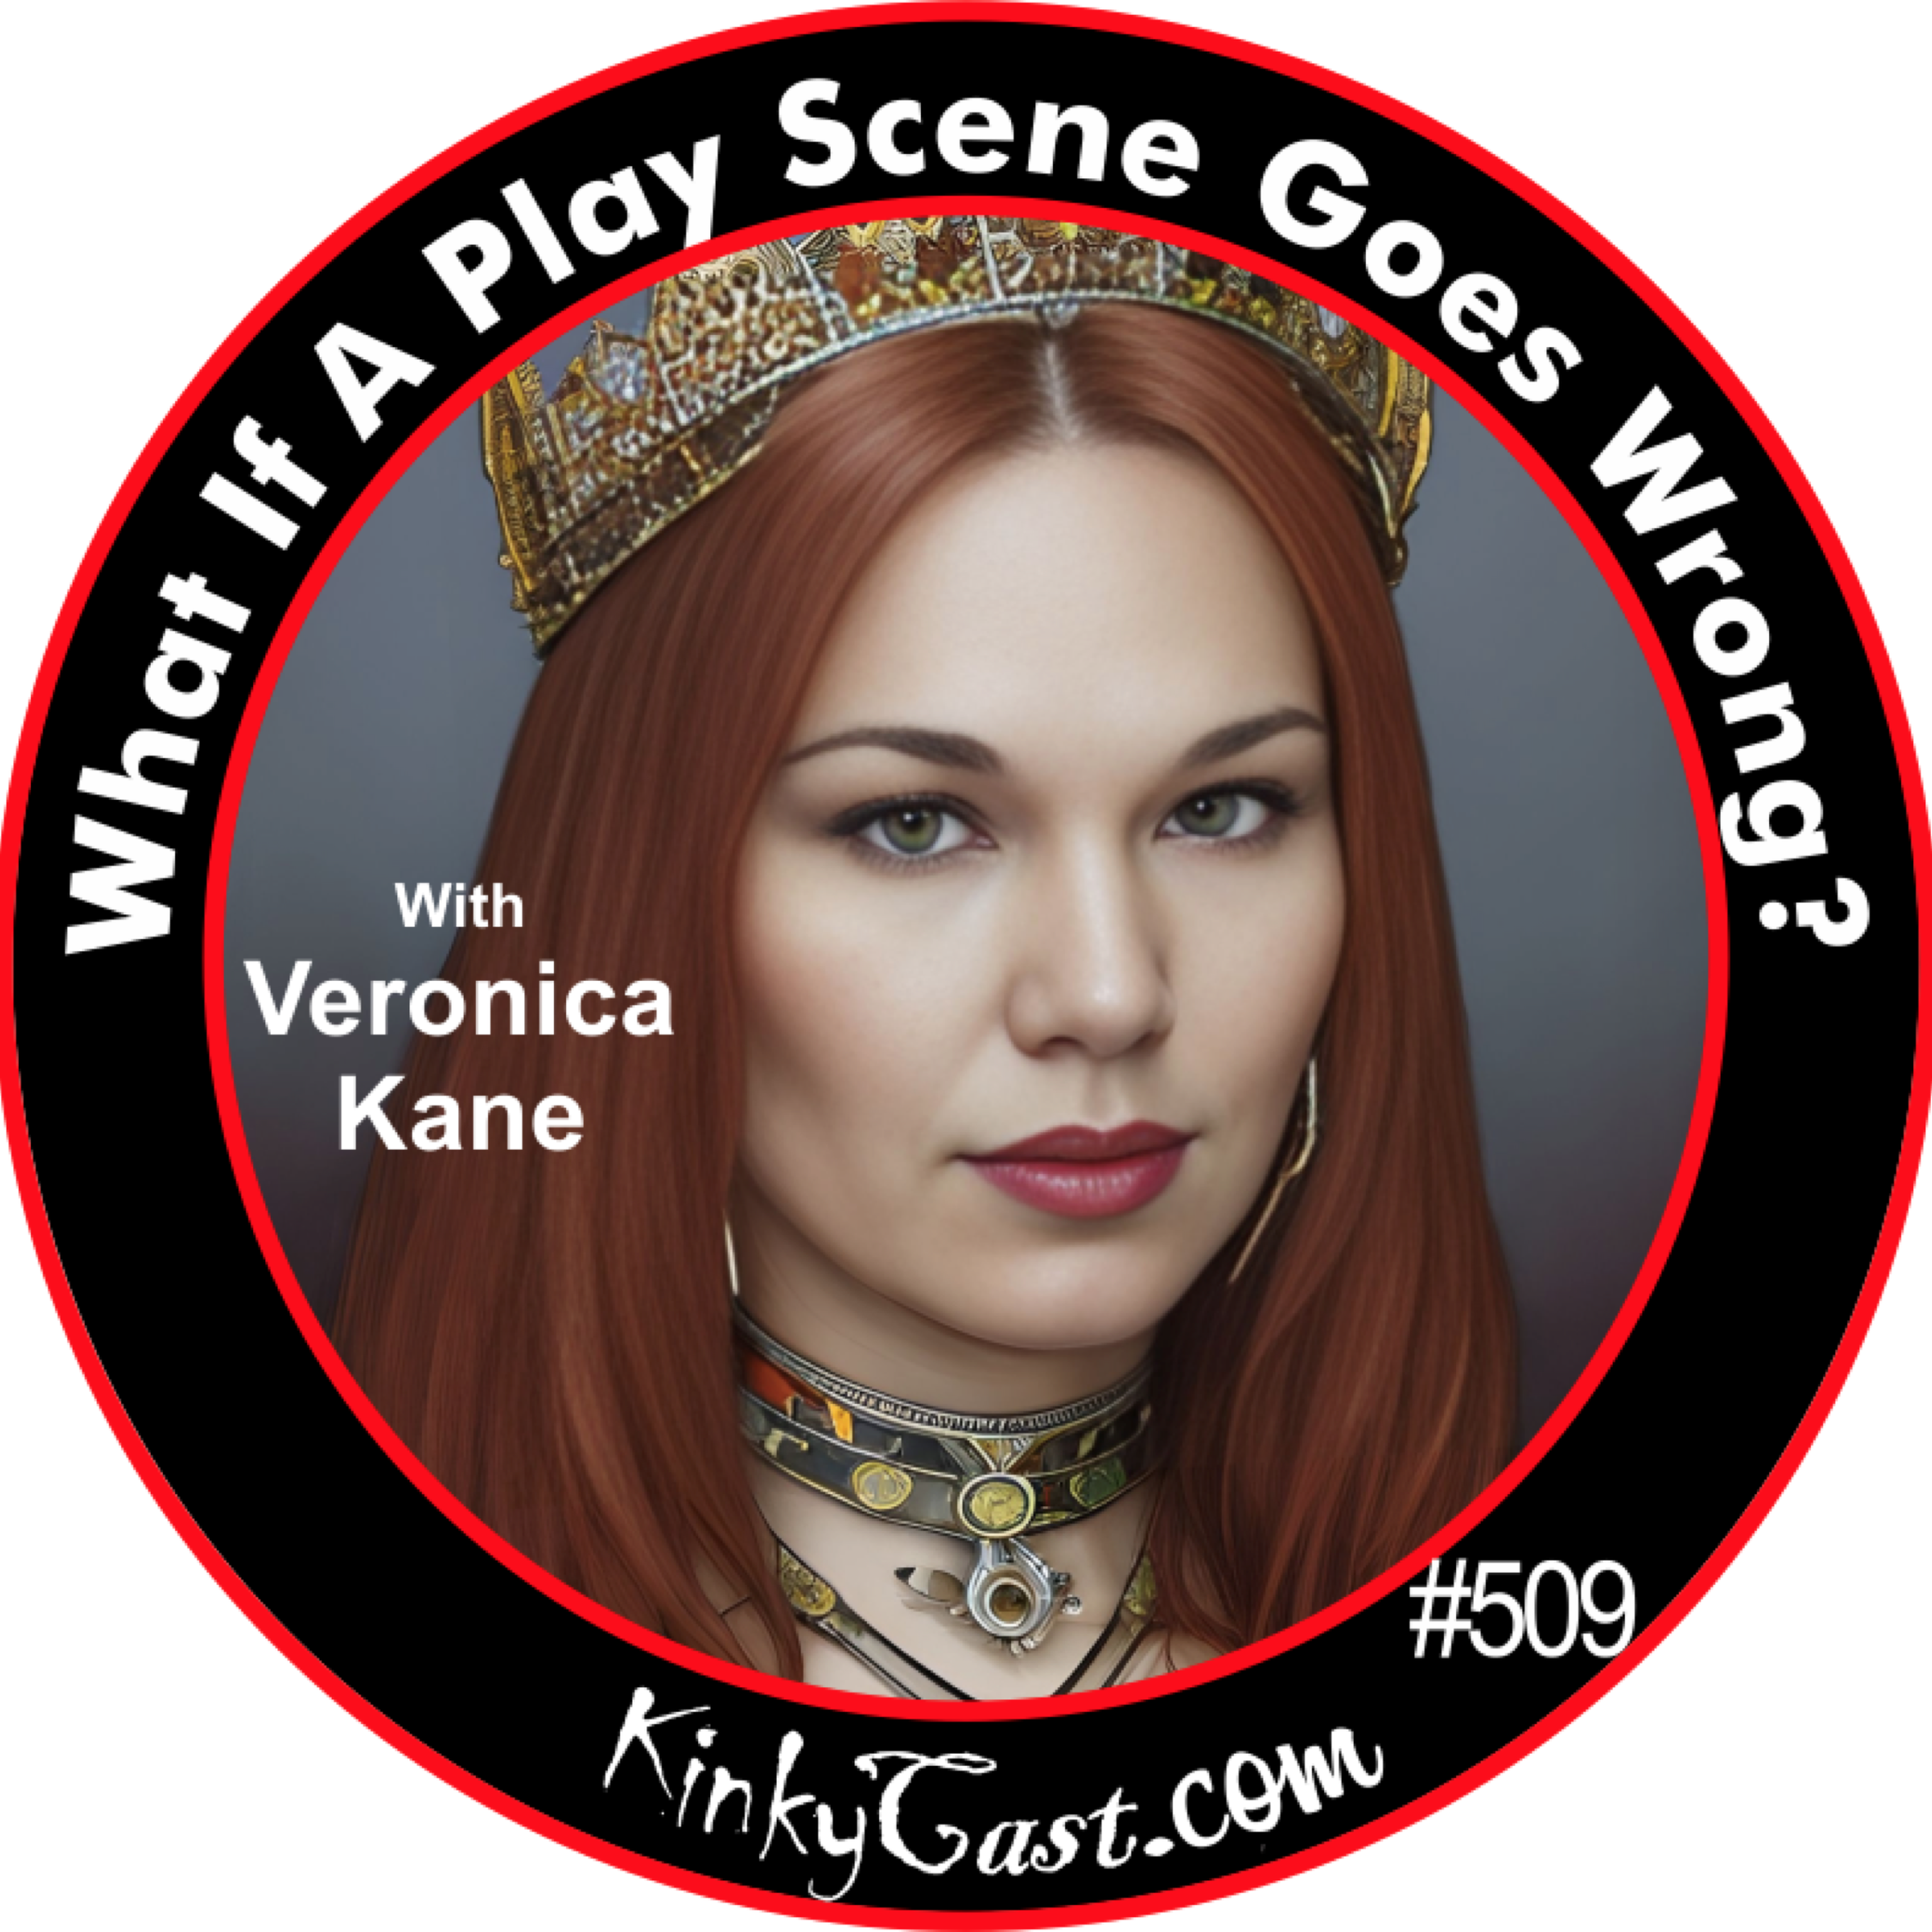 #509 - What If A Play Scene Goes Wrong - With Veronica Kane